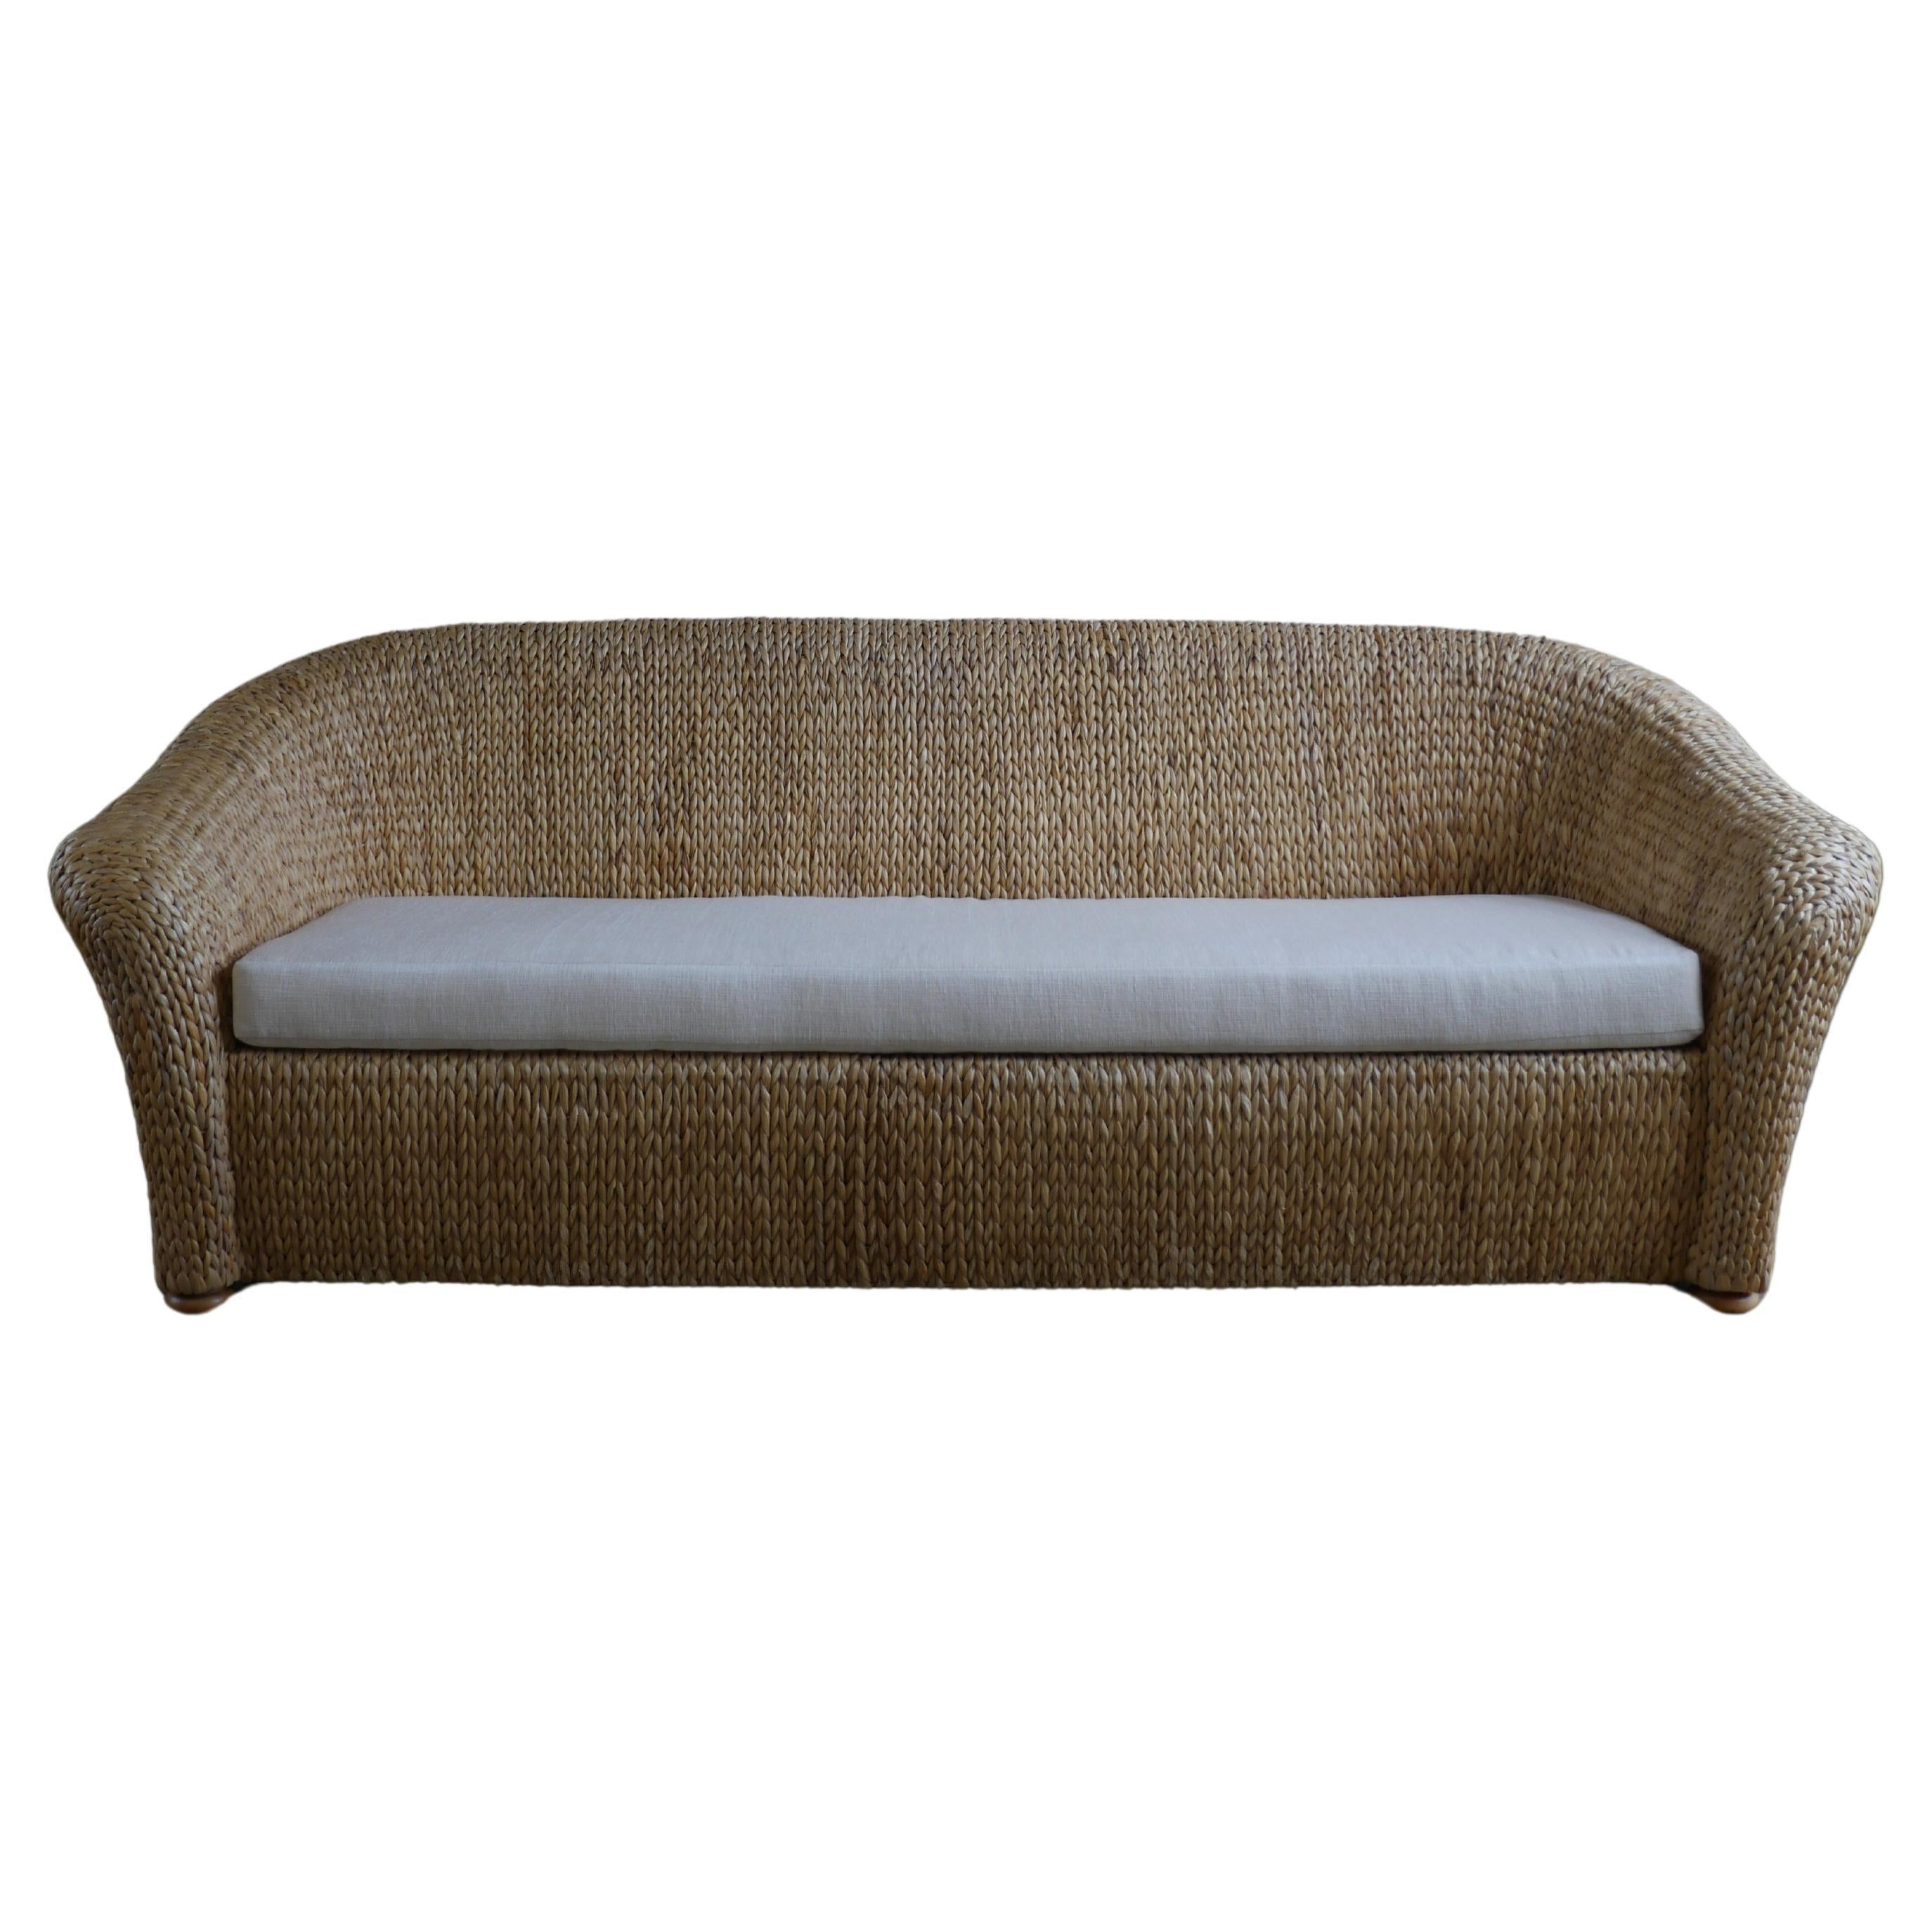 1990s Designer Water Hyacinth Sofa with Holly Hunt Chenille Upholstery 